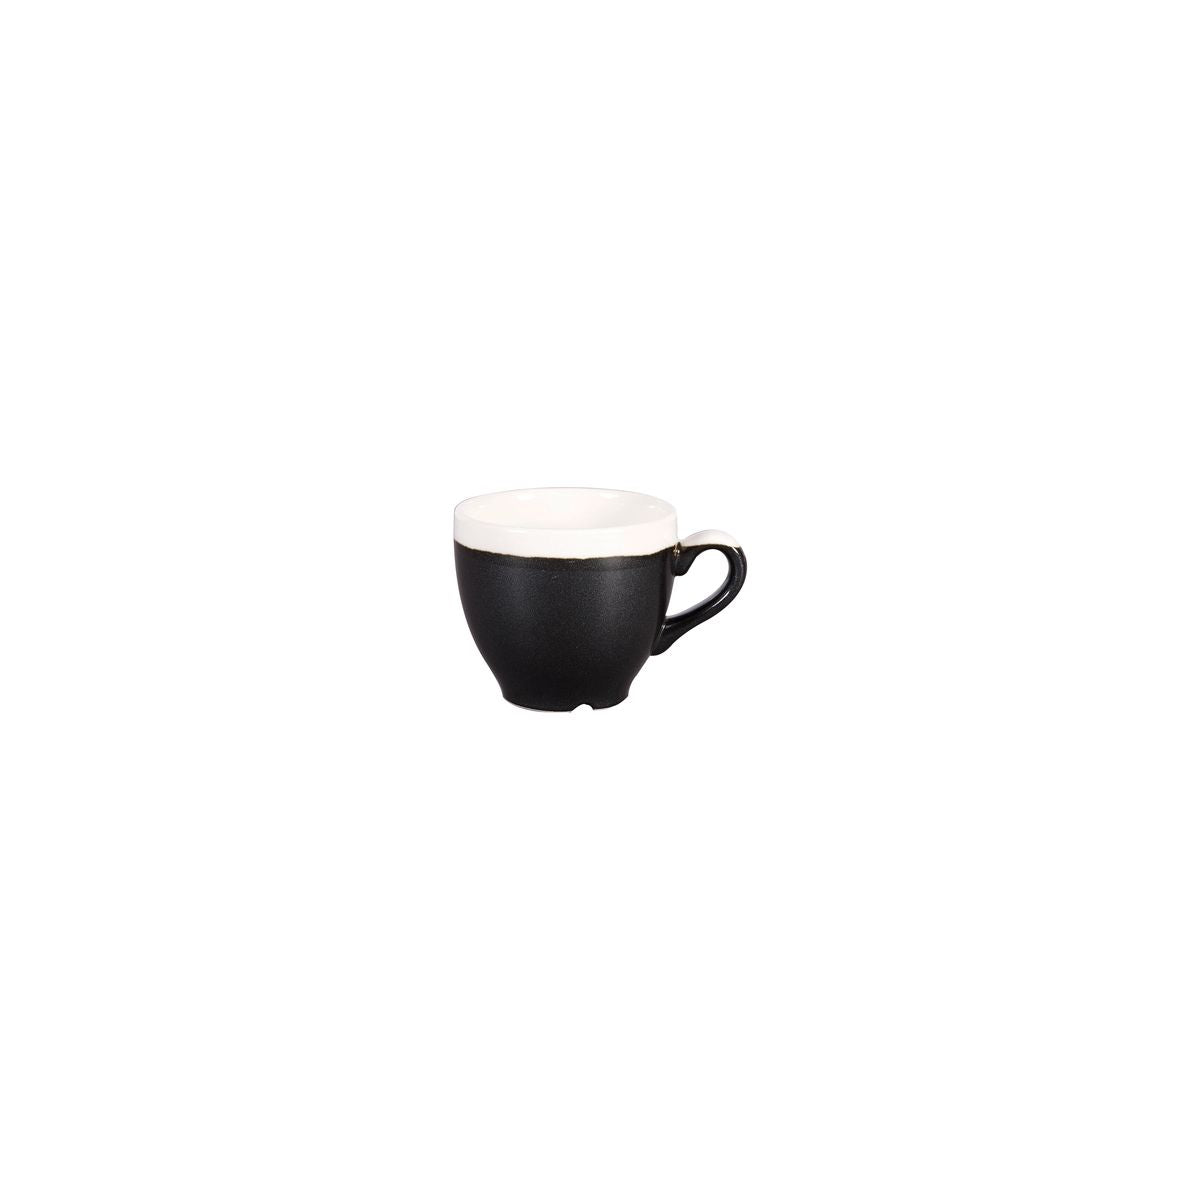 Espresso Cup - 100ml, Monochrome Black from Churchill. made out of Porcelain and sold in boxes of 12. Hospitality quality at wholesale price with The Flying Fork! 